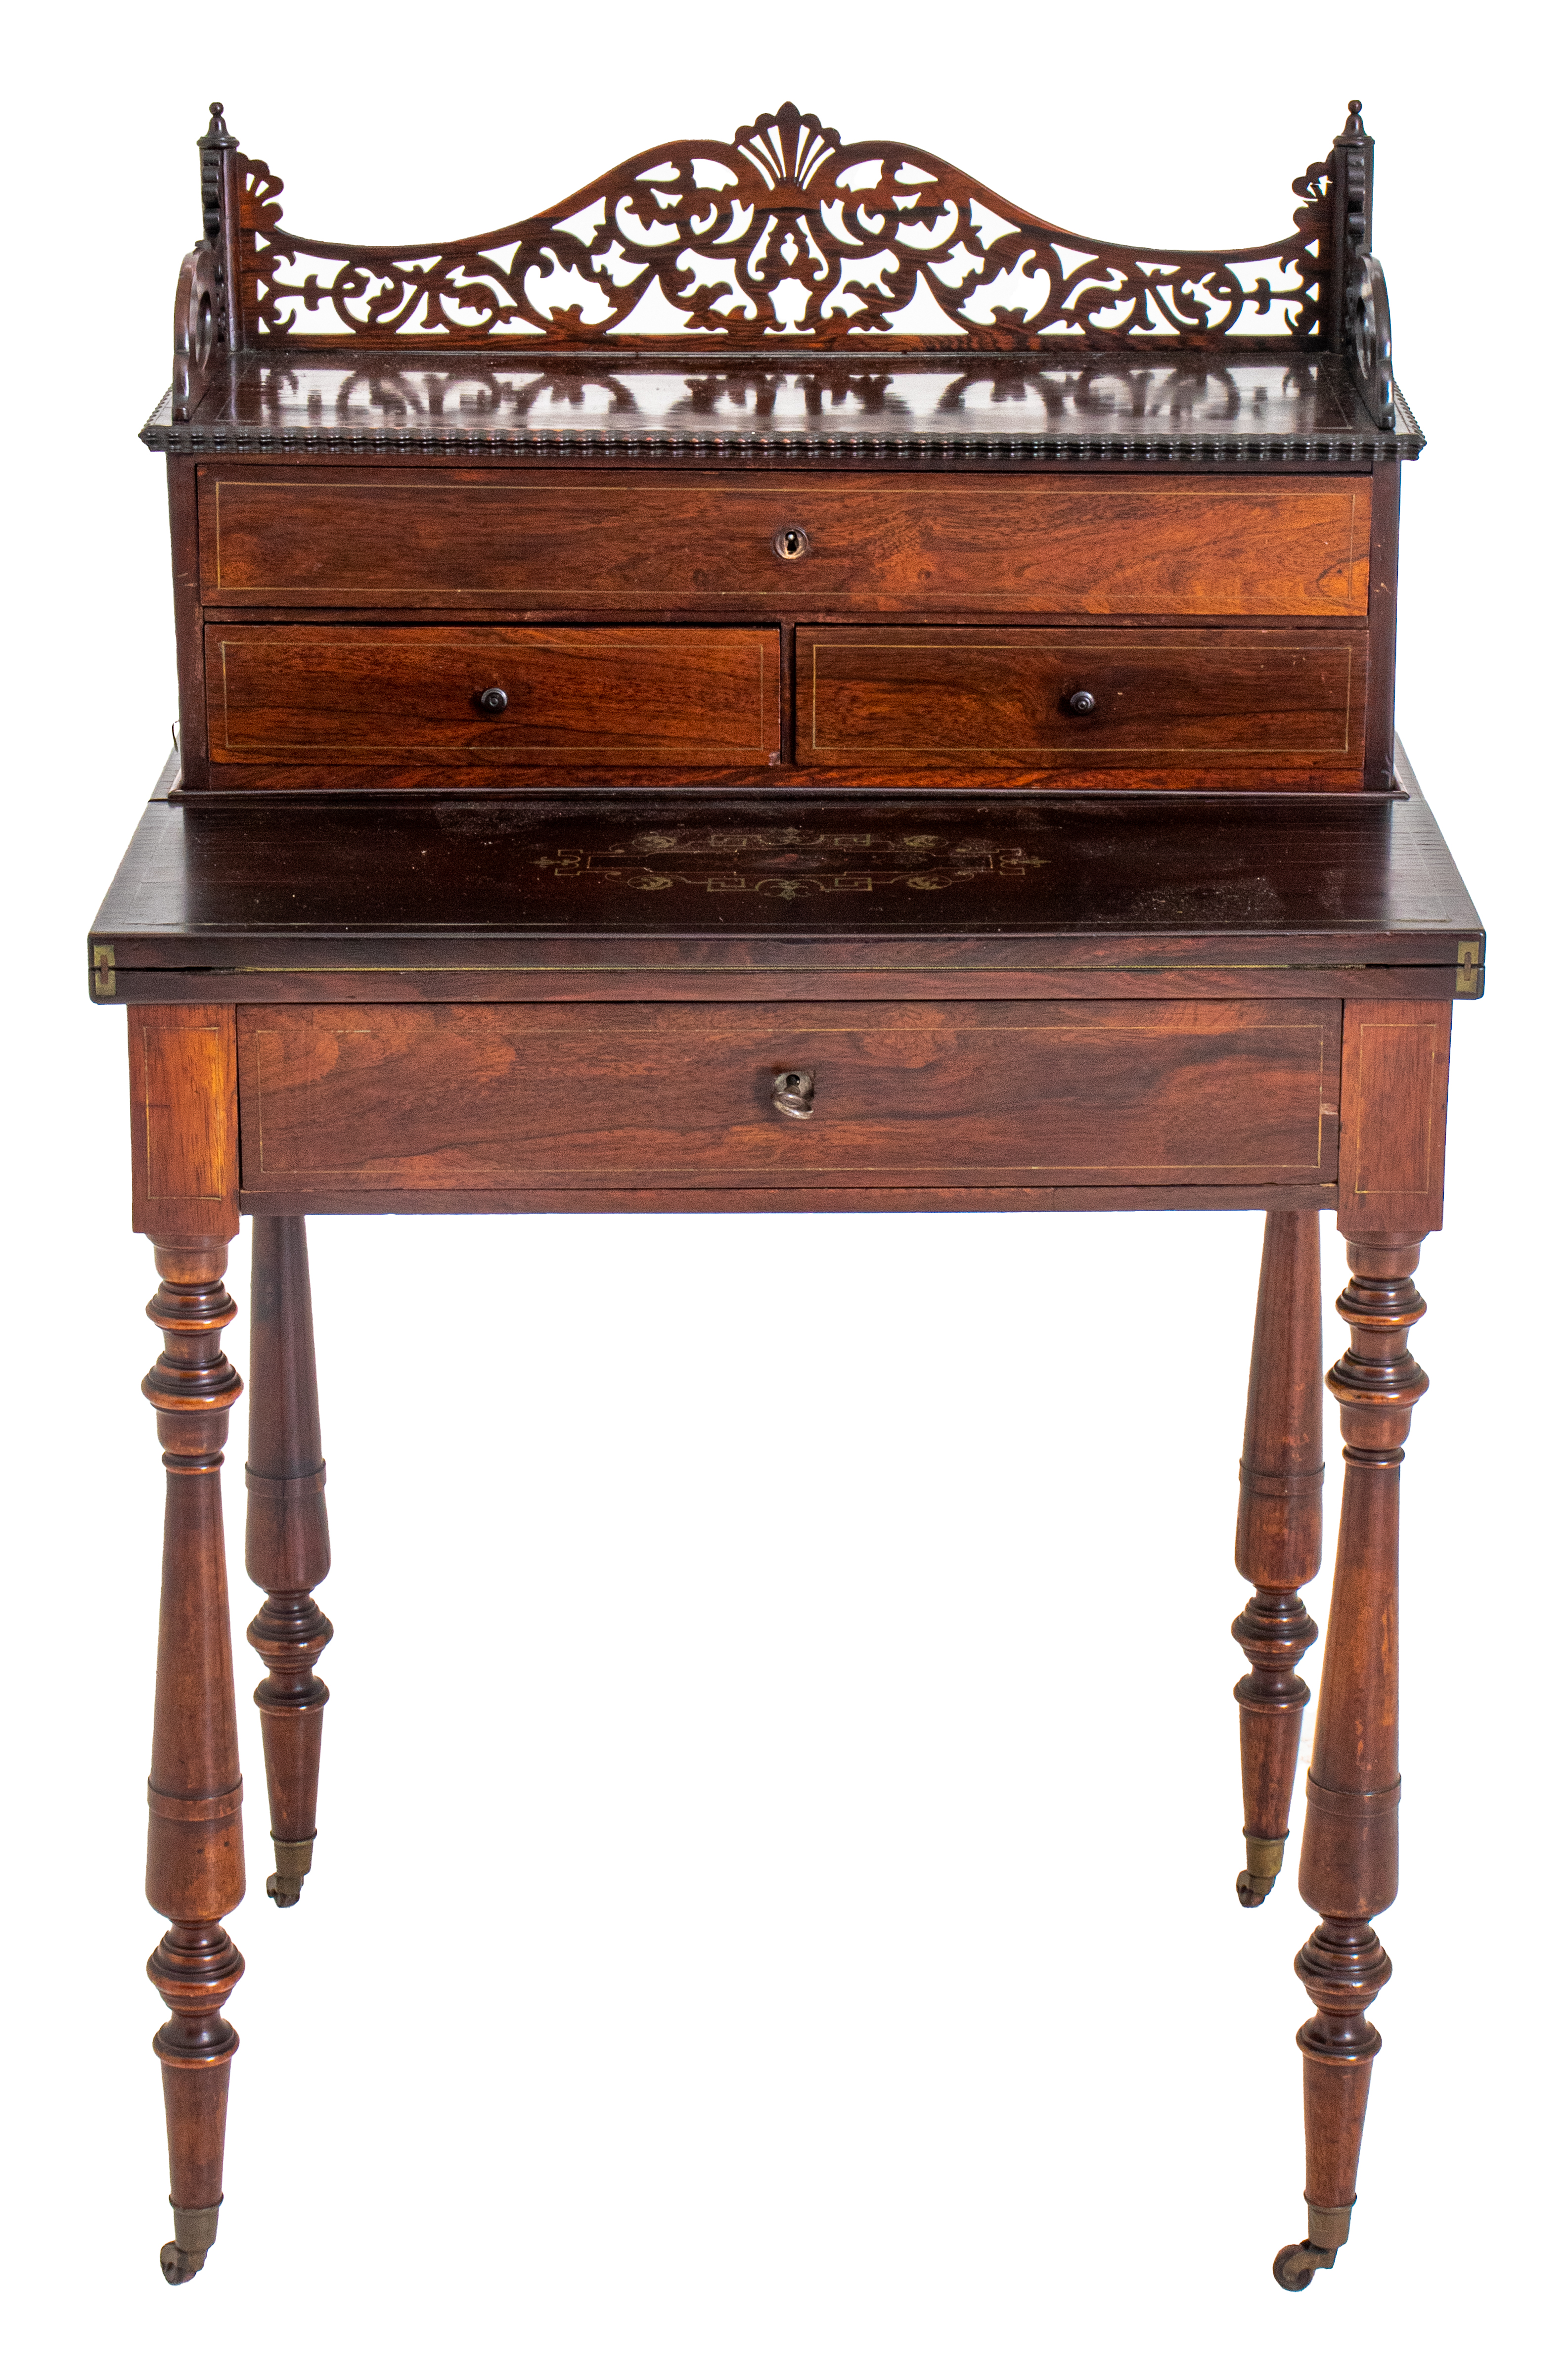 VICTORIAN BRASS-INLAID ROSEWOOD LADY'S DESK